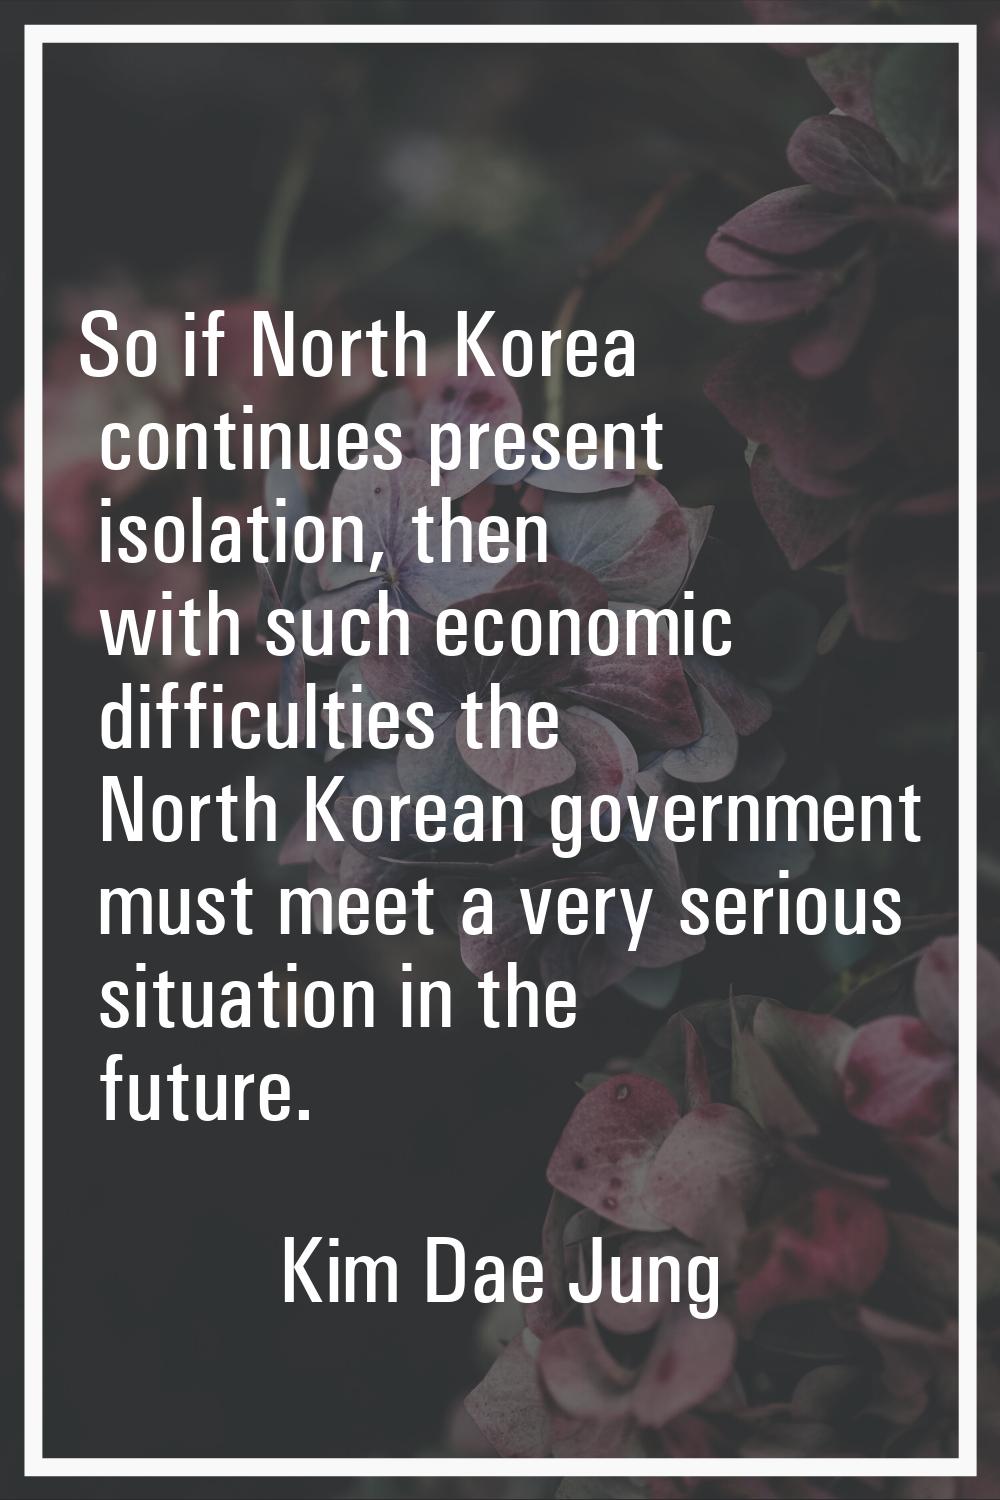 So if North Korea continues present isolation, then with such economic difficulties the North Korea